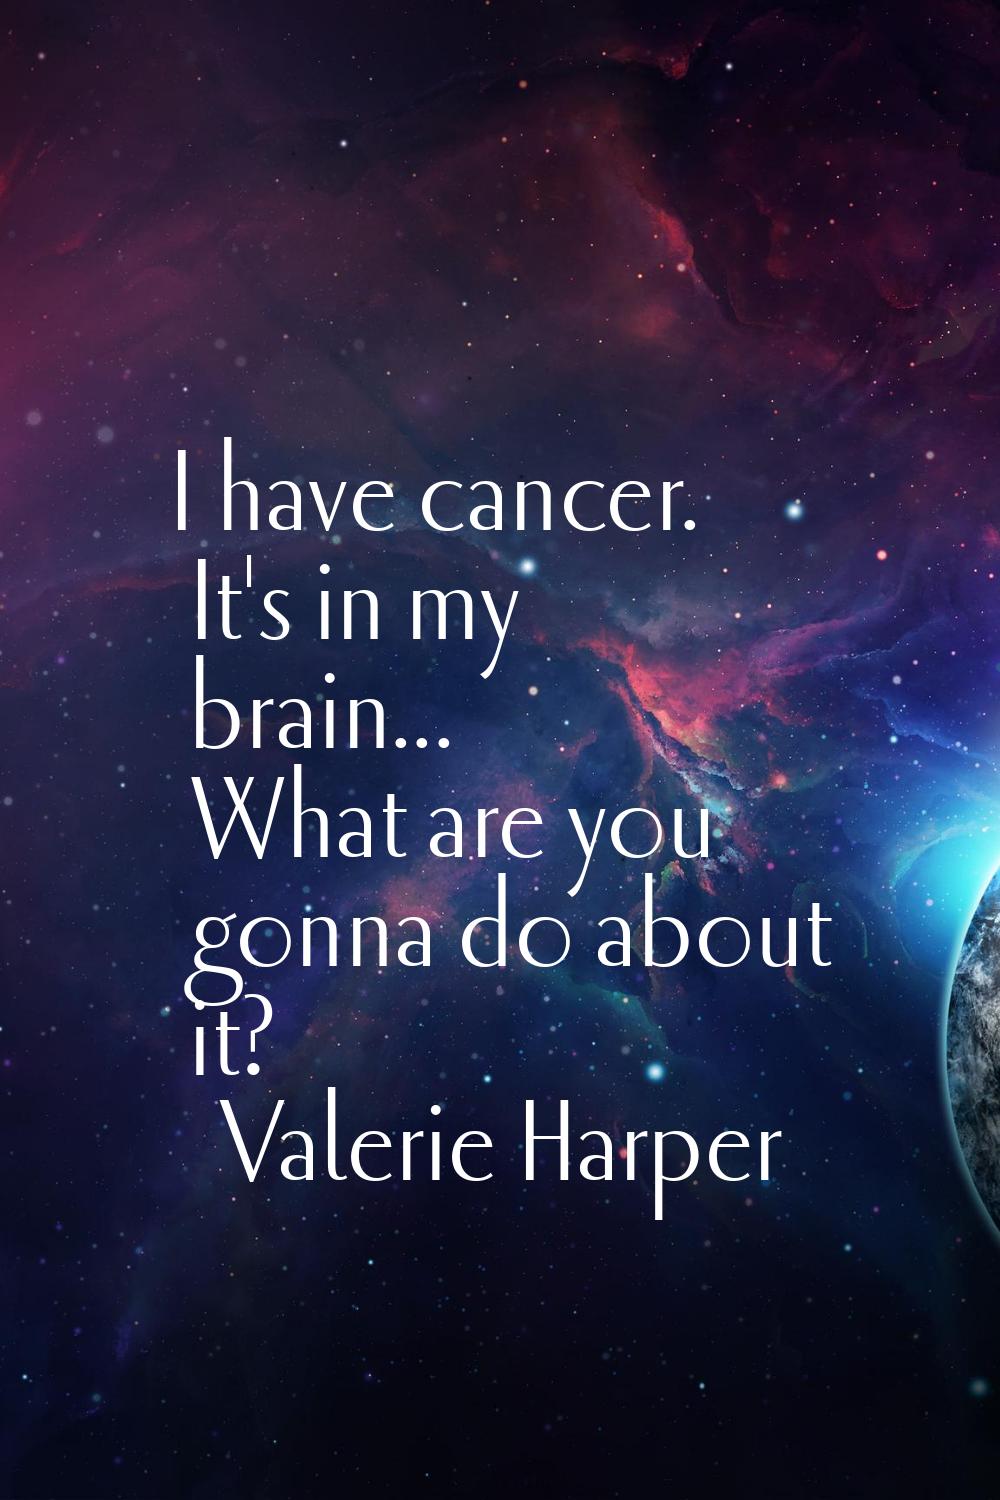 I have cancer. It's in my brain... What are you gonna do about it?